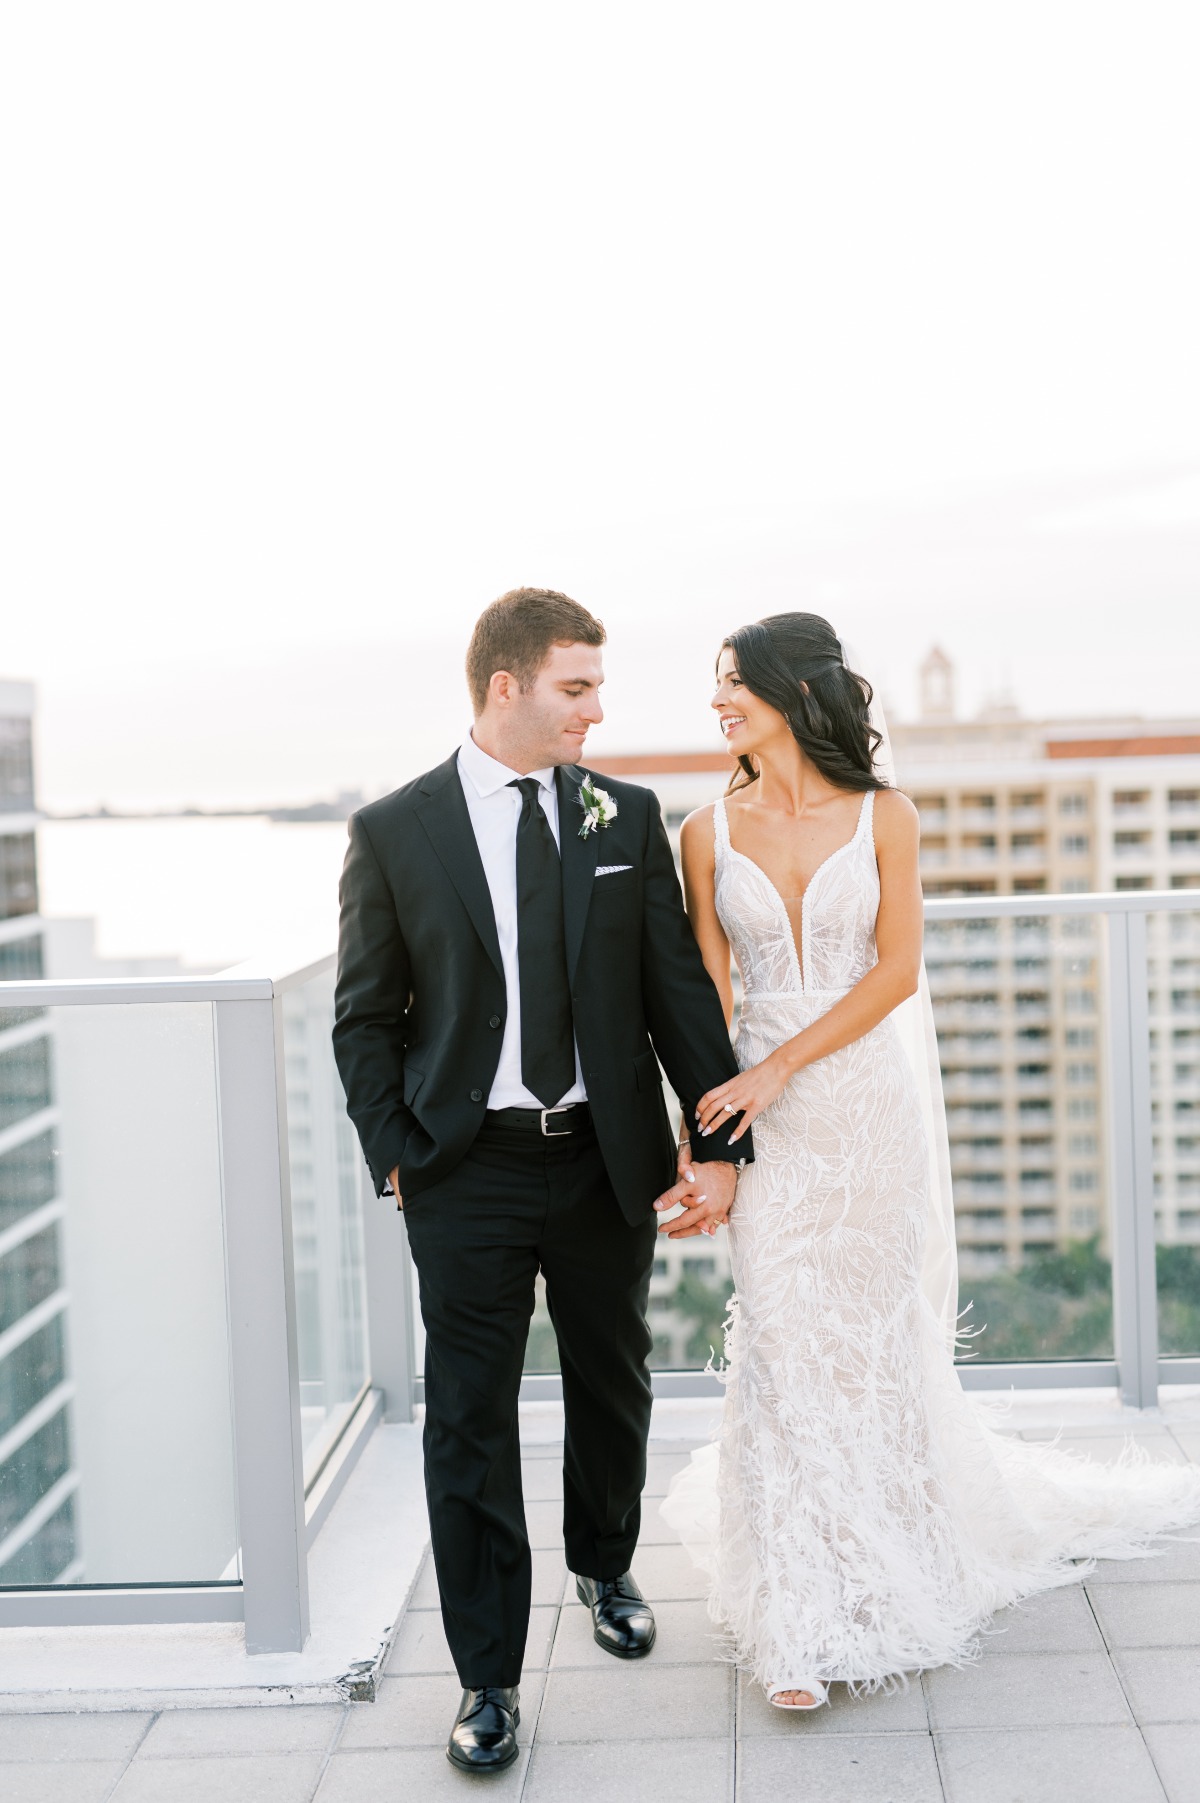 Sunset rooftop bride and groom